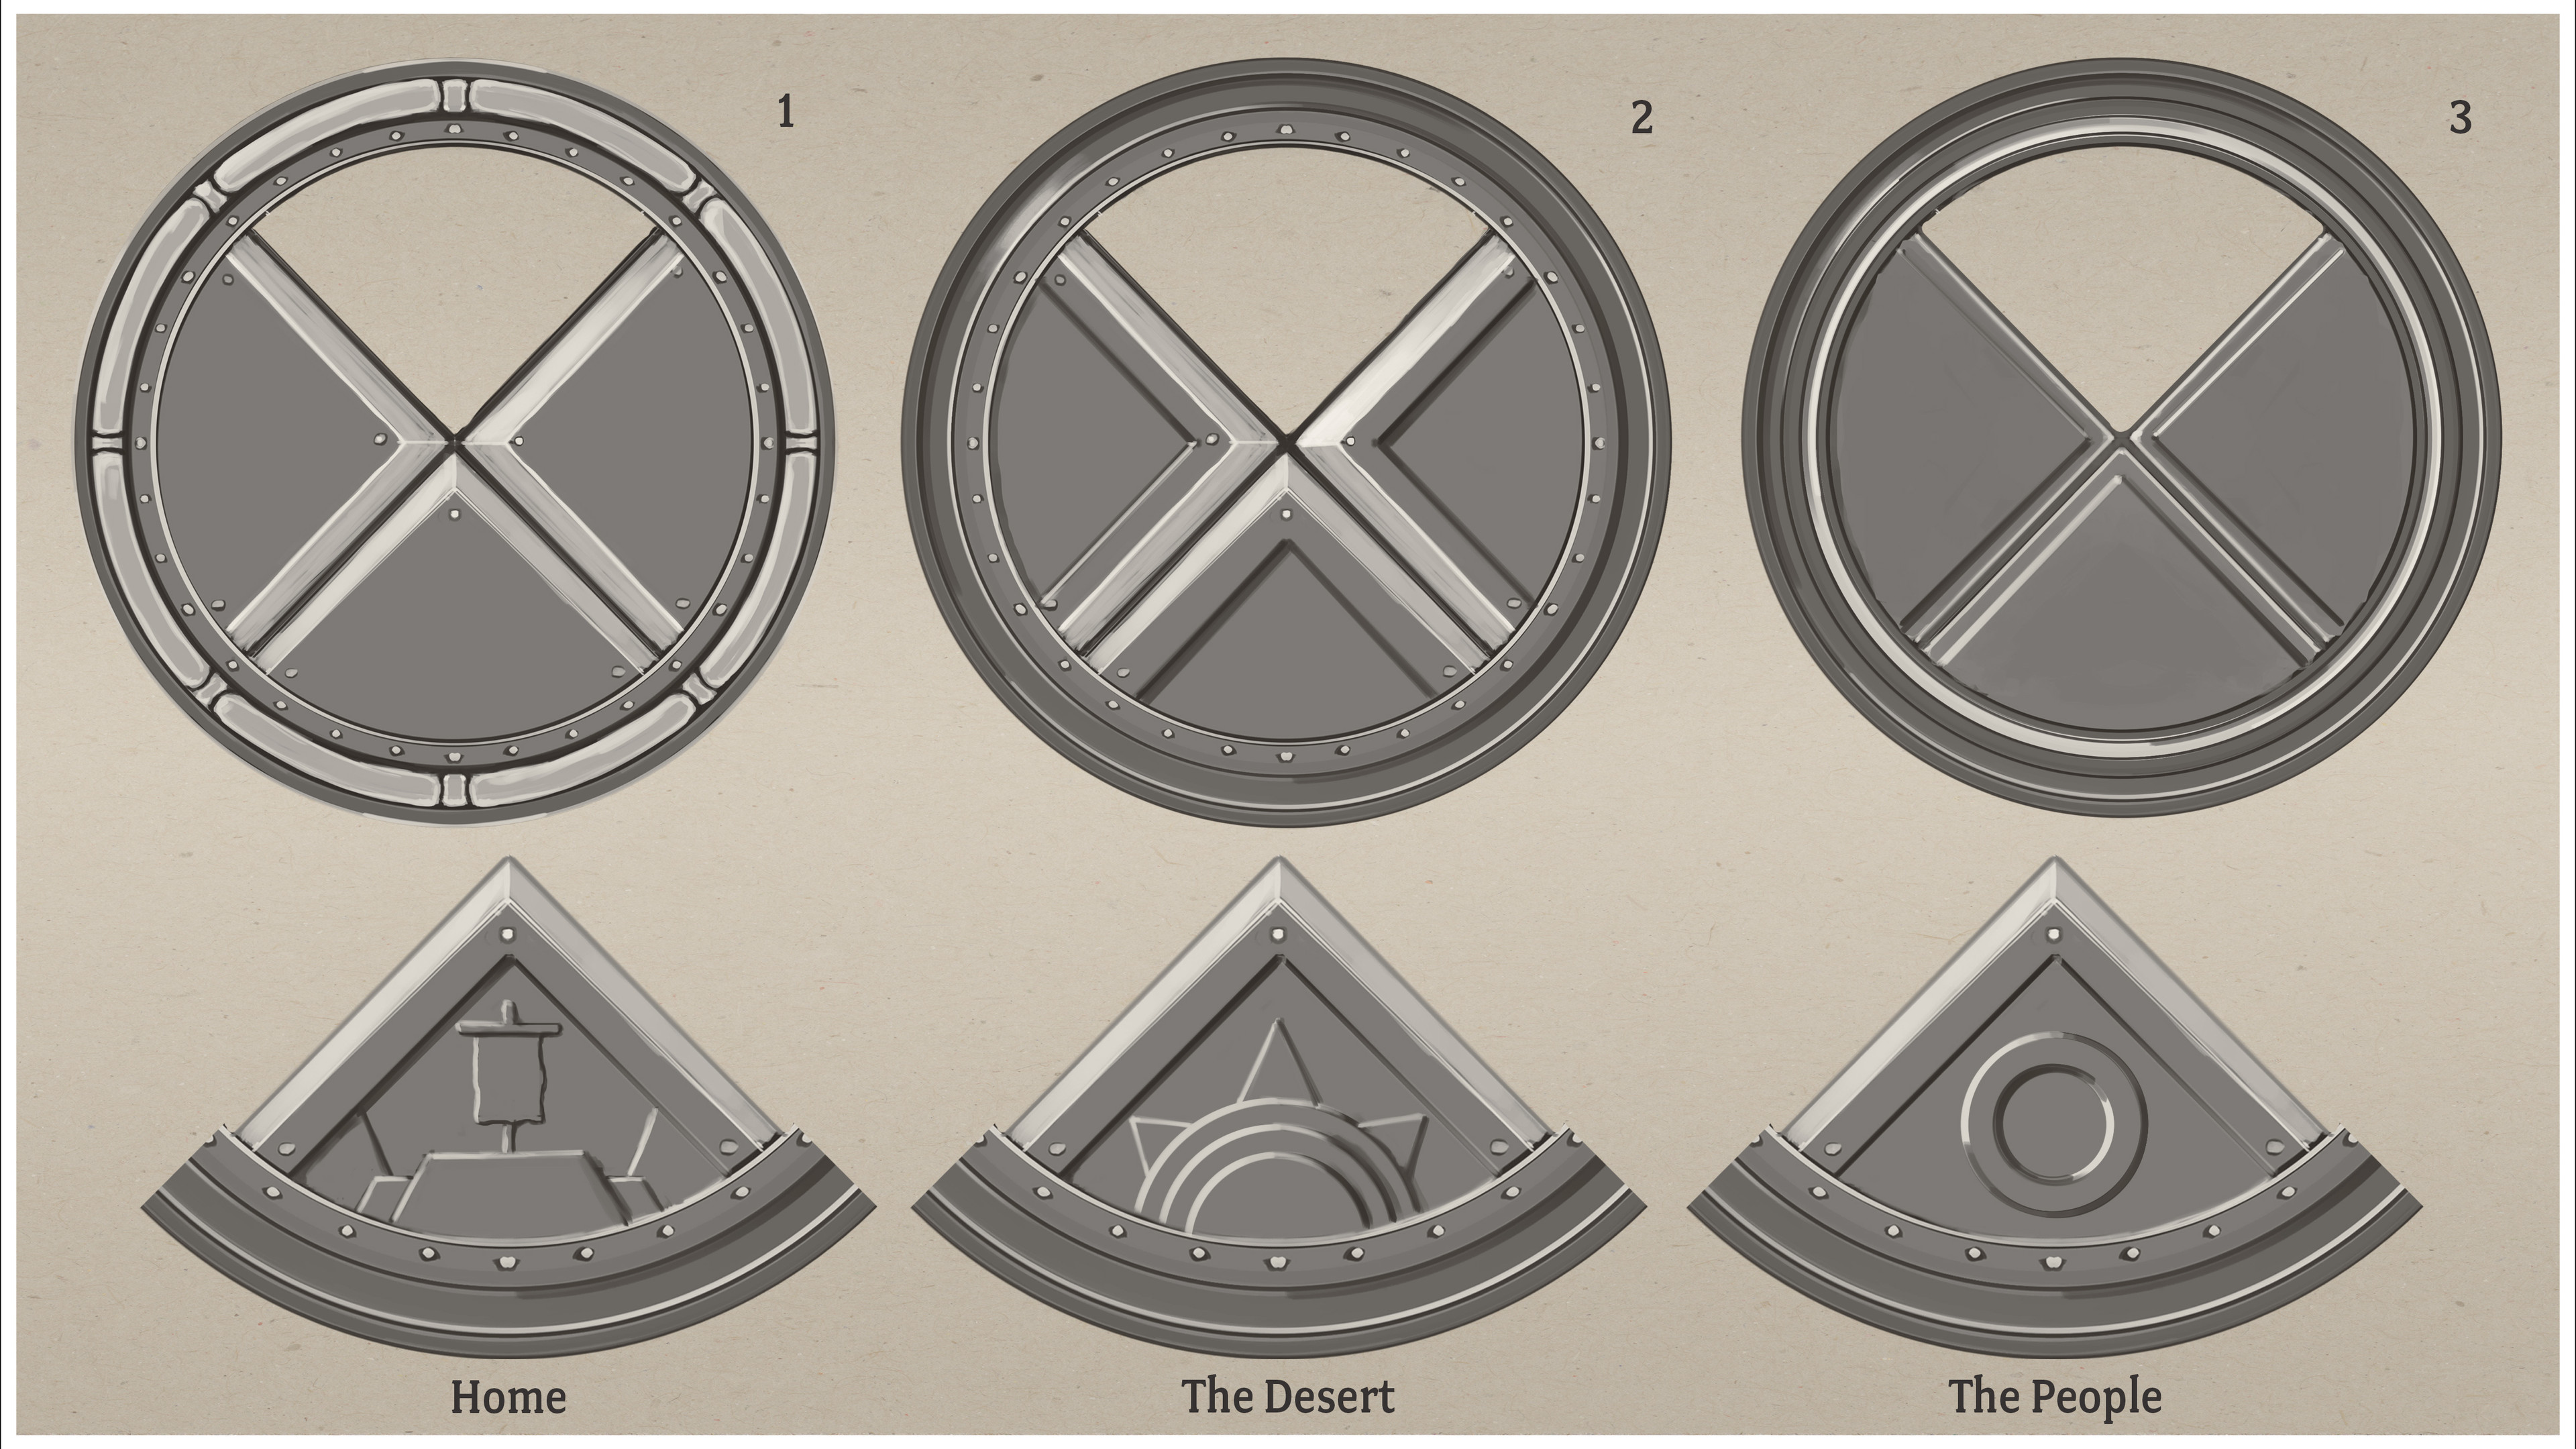 The three symbols on the coins represent the things most important to the citizens of Nyreen - their home, the desert, and the people themselves.